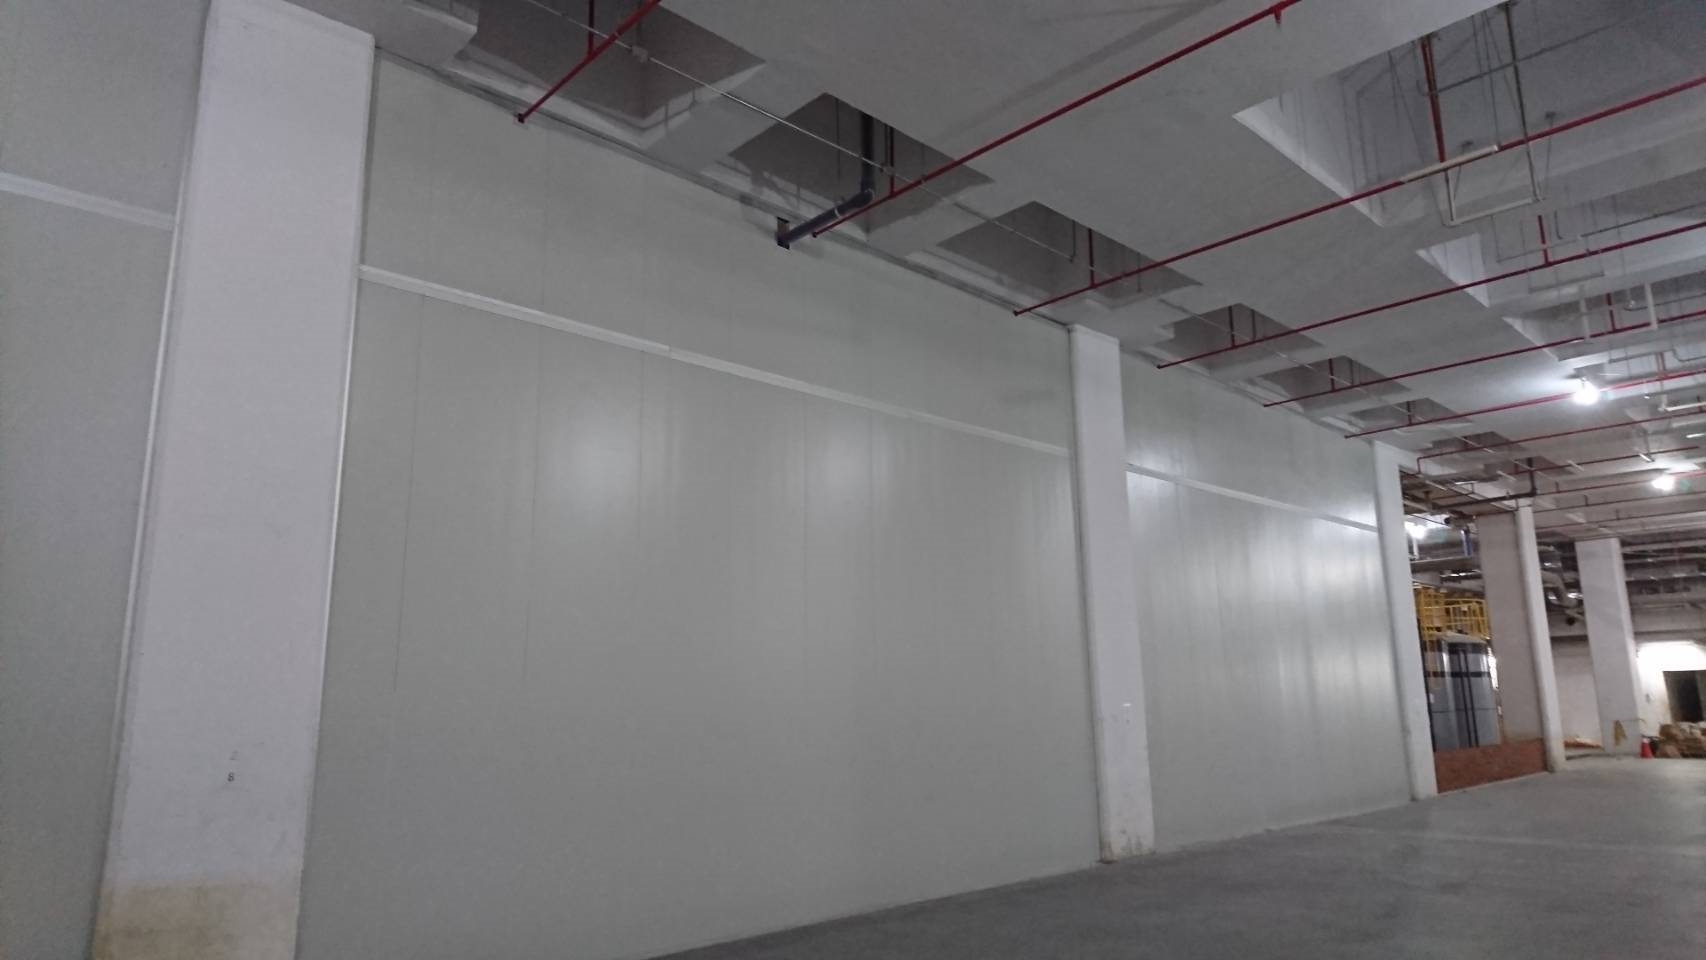 Construction of storage rooms, mezzanines and partitions